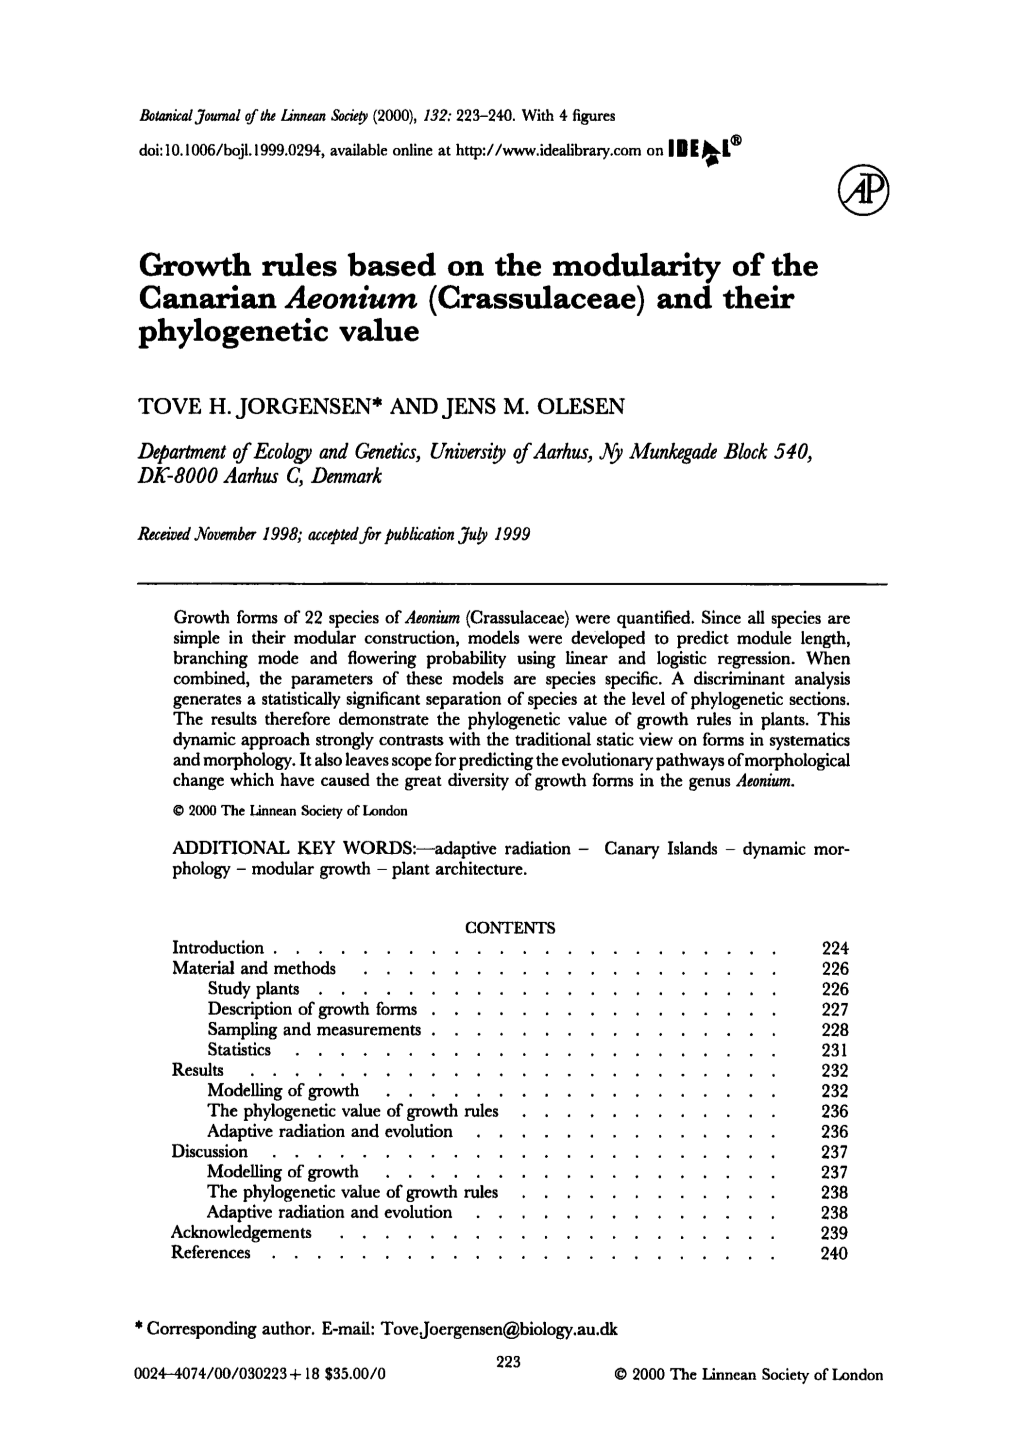 Growth Rules Based on the Modularity of the Canarian Aeonium